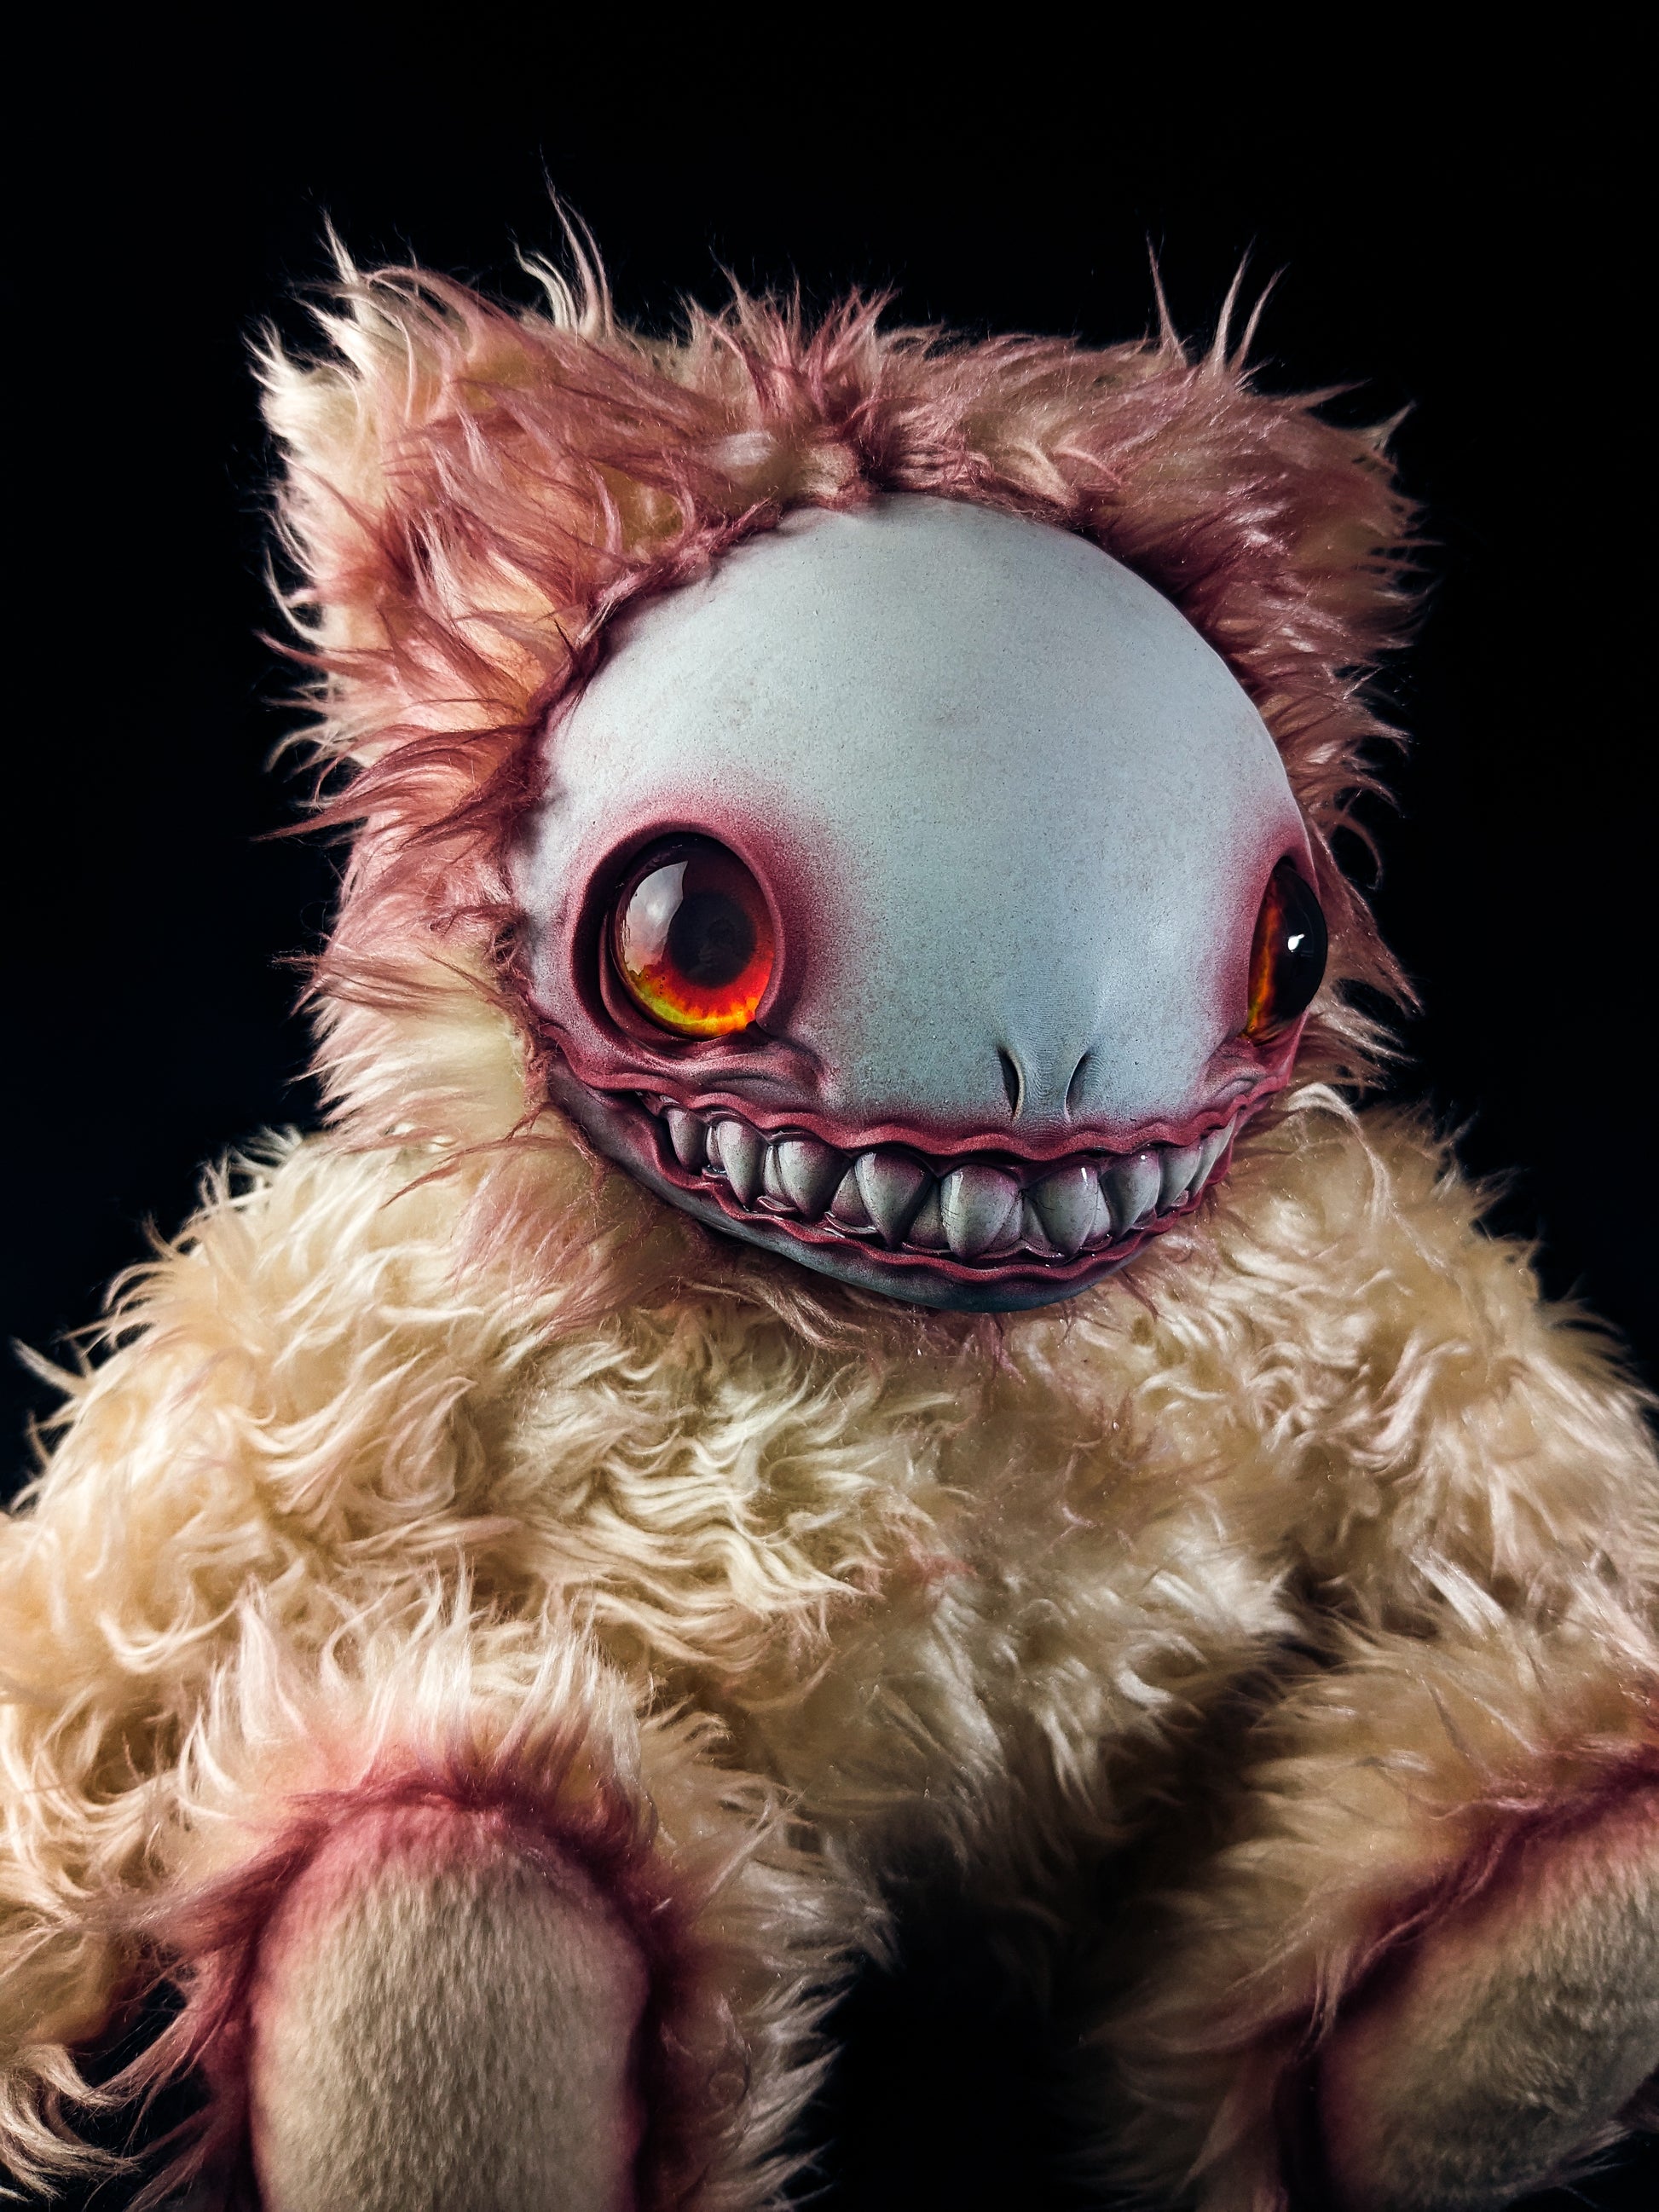 Bloody Gaze: FRIEND - CRYPTCRITZ Handcrafted Alien Art Doll Plush Toy for Cosmic Dreamers